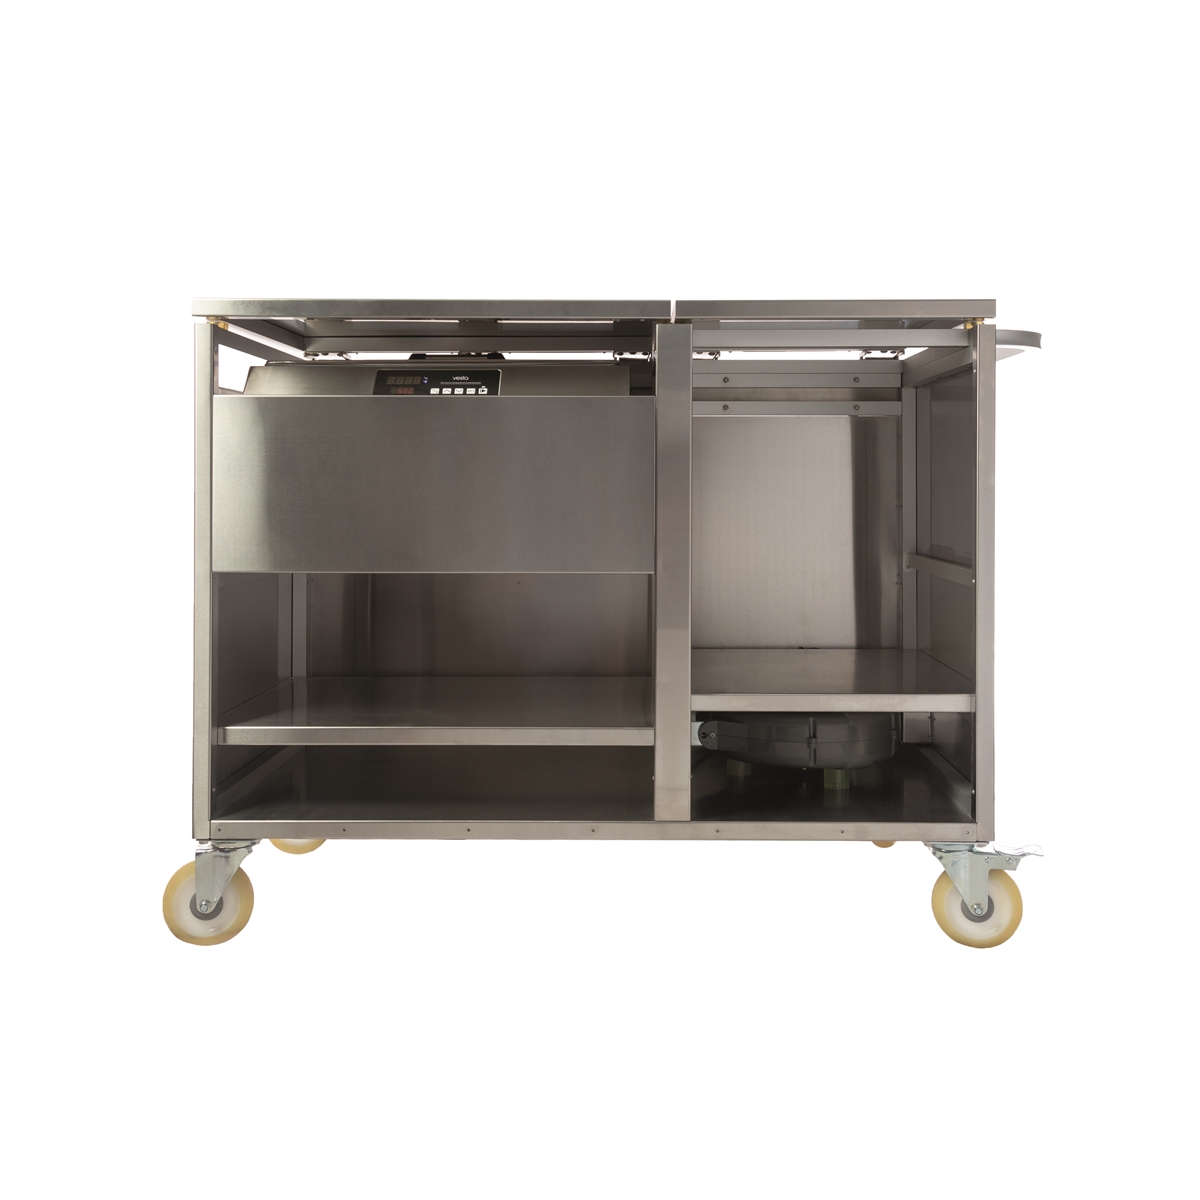 Mobile Station for Sous Vide Cooking in Stainless Steel - Housings for Sous-Vide and Vacuum Machine